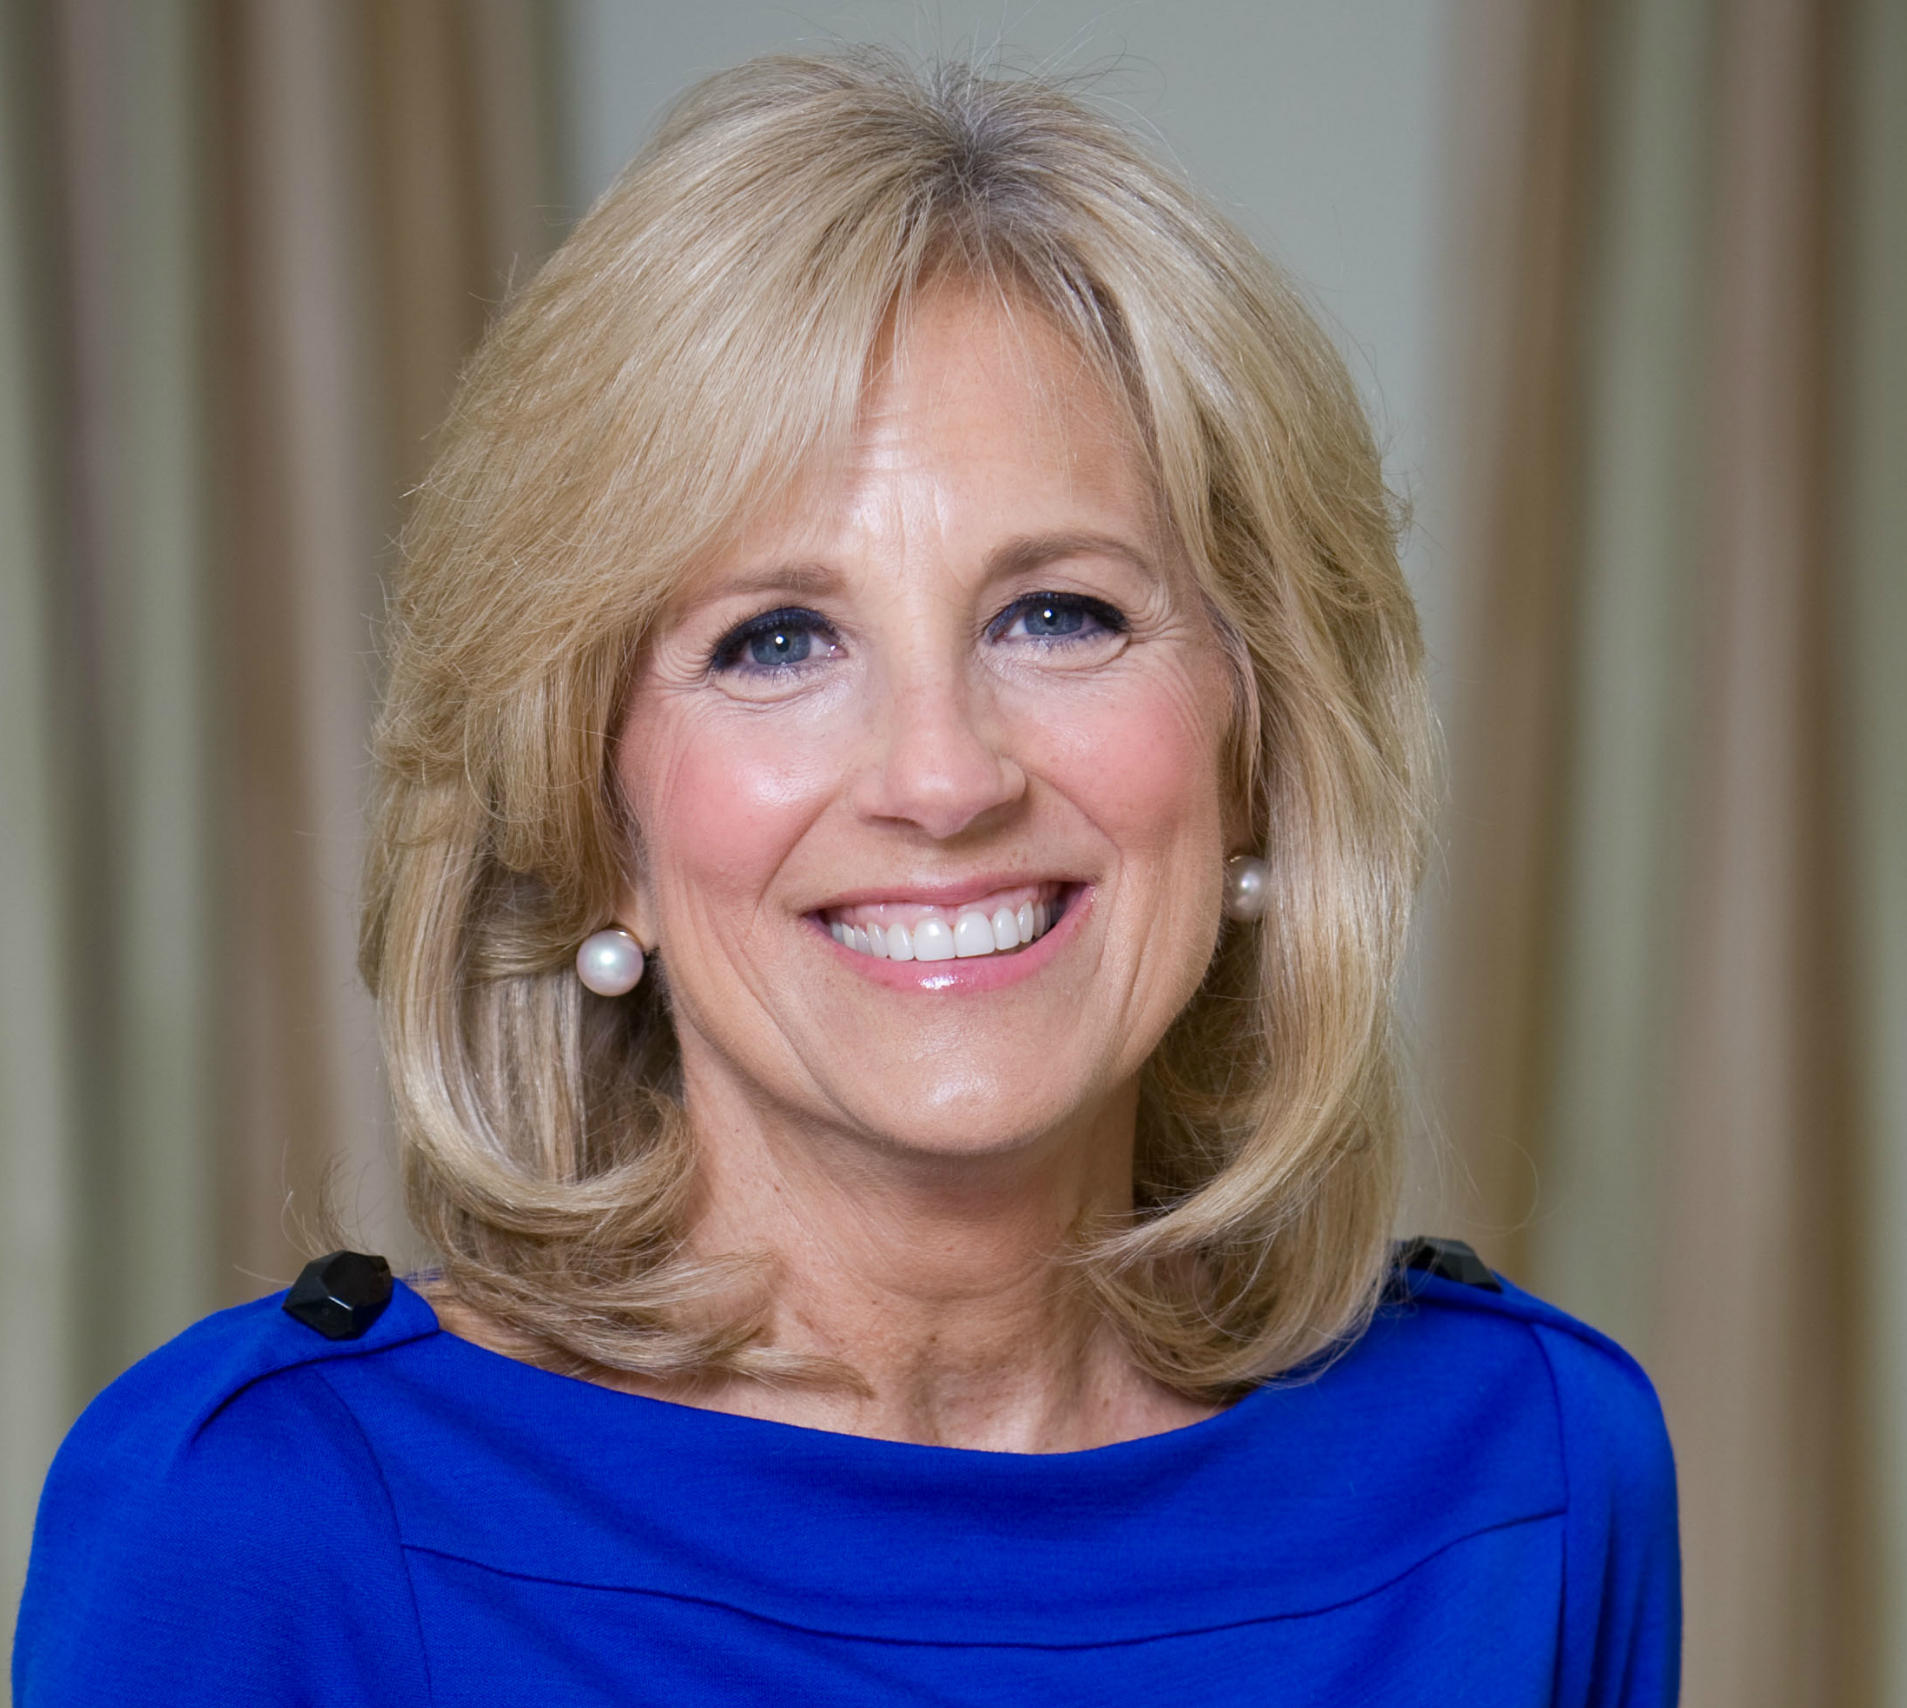 Dr. Jill Biden is officially one of the coolest ladies in 